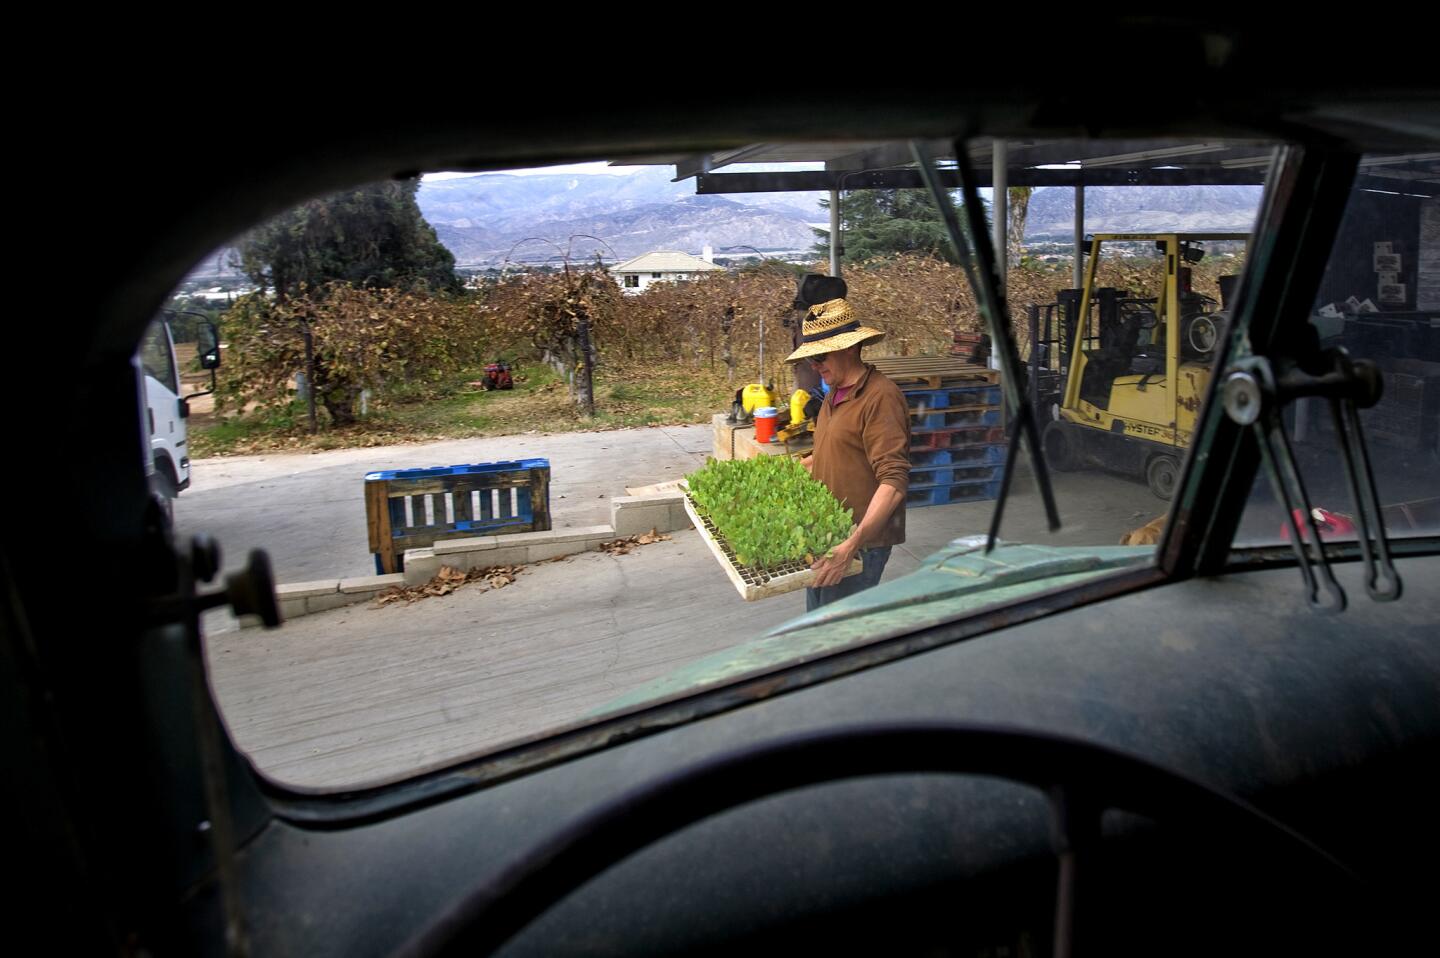 Farmer Bob Knight is framed thought the windshield of his 1941 Ford truck as he carries cauliflower seedlings ready for planting Jan, 7 in Redlands. Knight is a fourth-generation orange grower who sells his citrus to L.A. Unified and is also shifting production to vegetables.